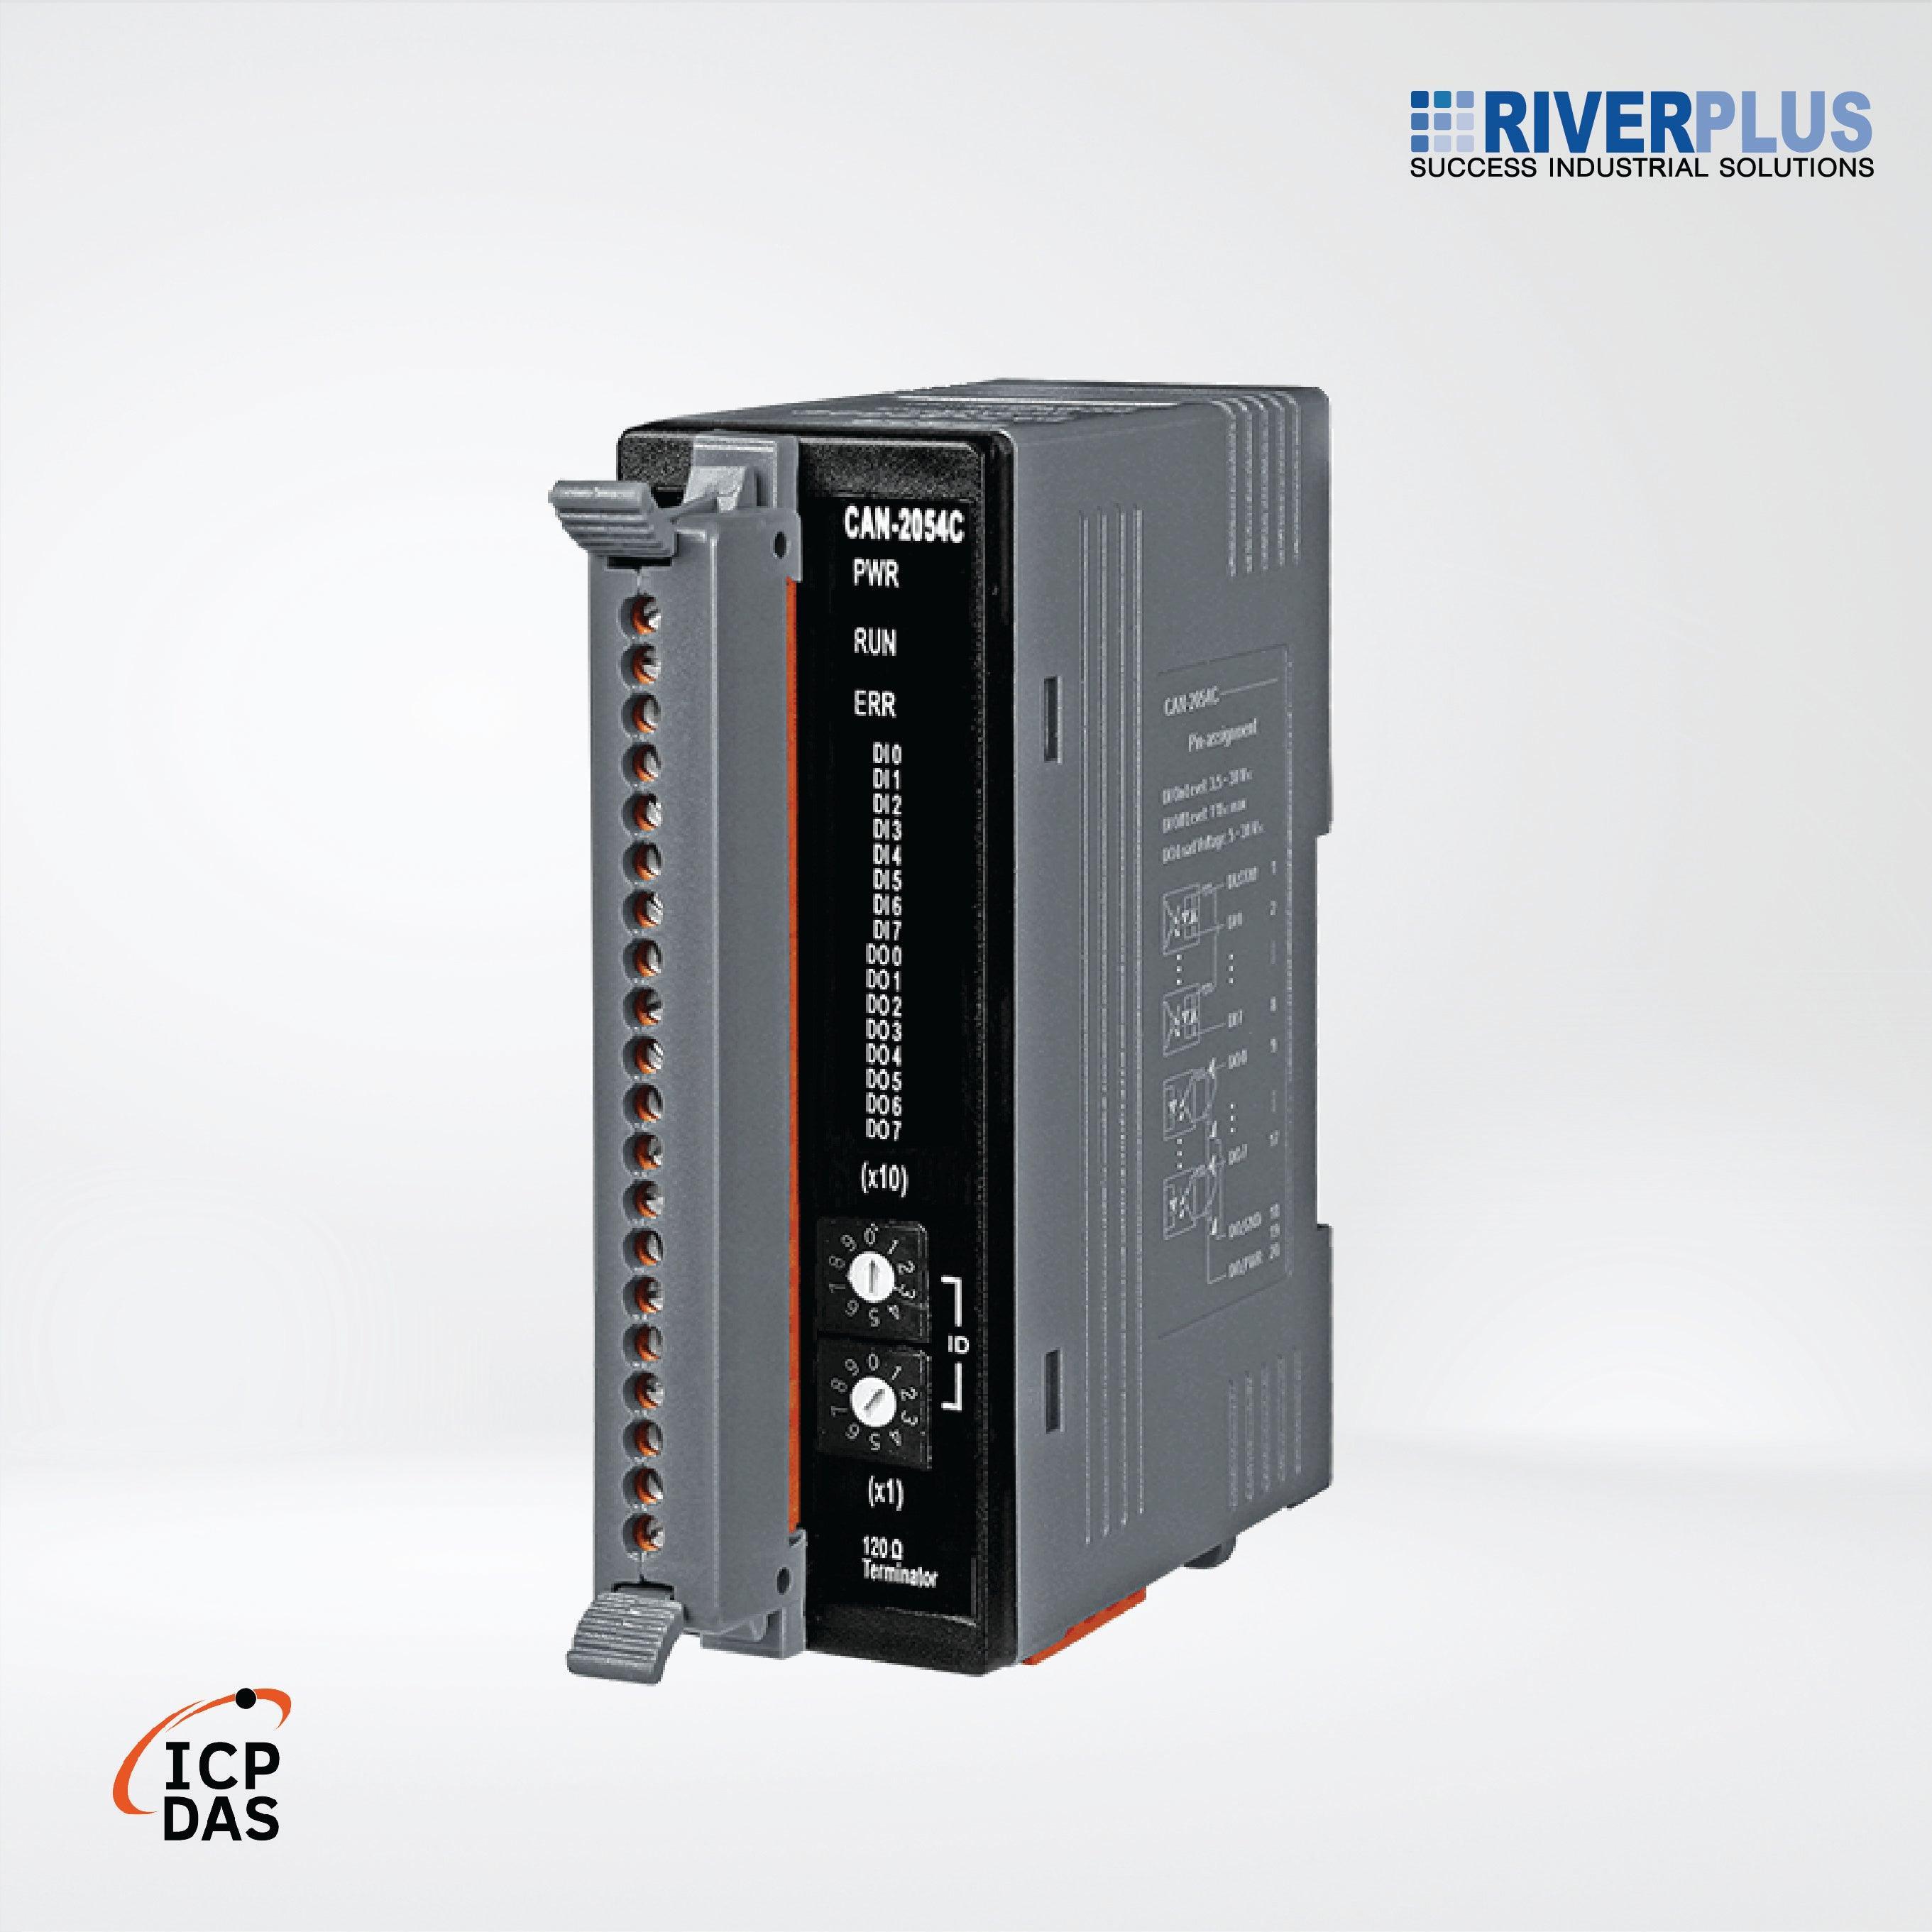 CAN-2054C CANopen Slave Module of 8-channel Isolated (Wet) DI, (Sink, NPN) DO - Riverplus